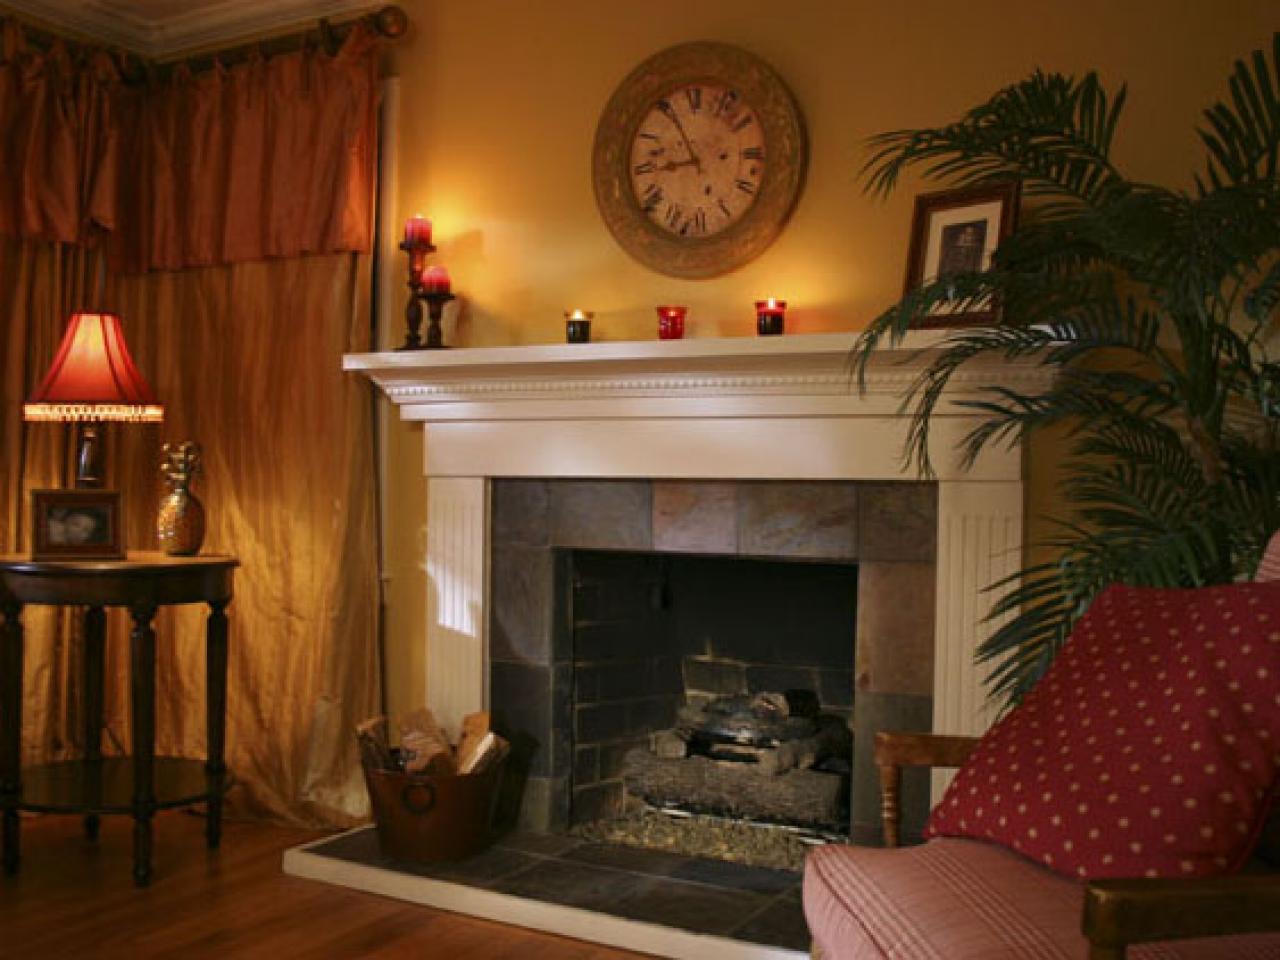 How To Improve Your Fireplace, How To Tile Over Slate Fireplace Surround